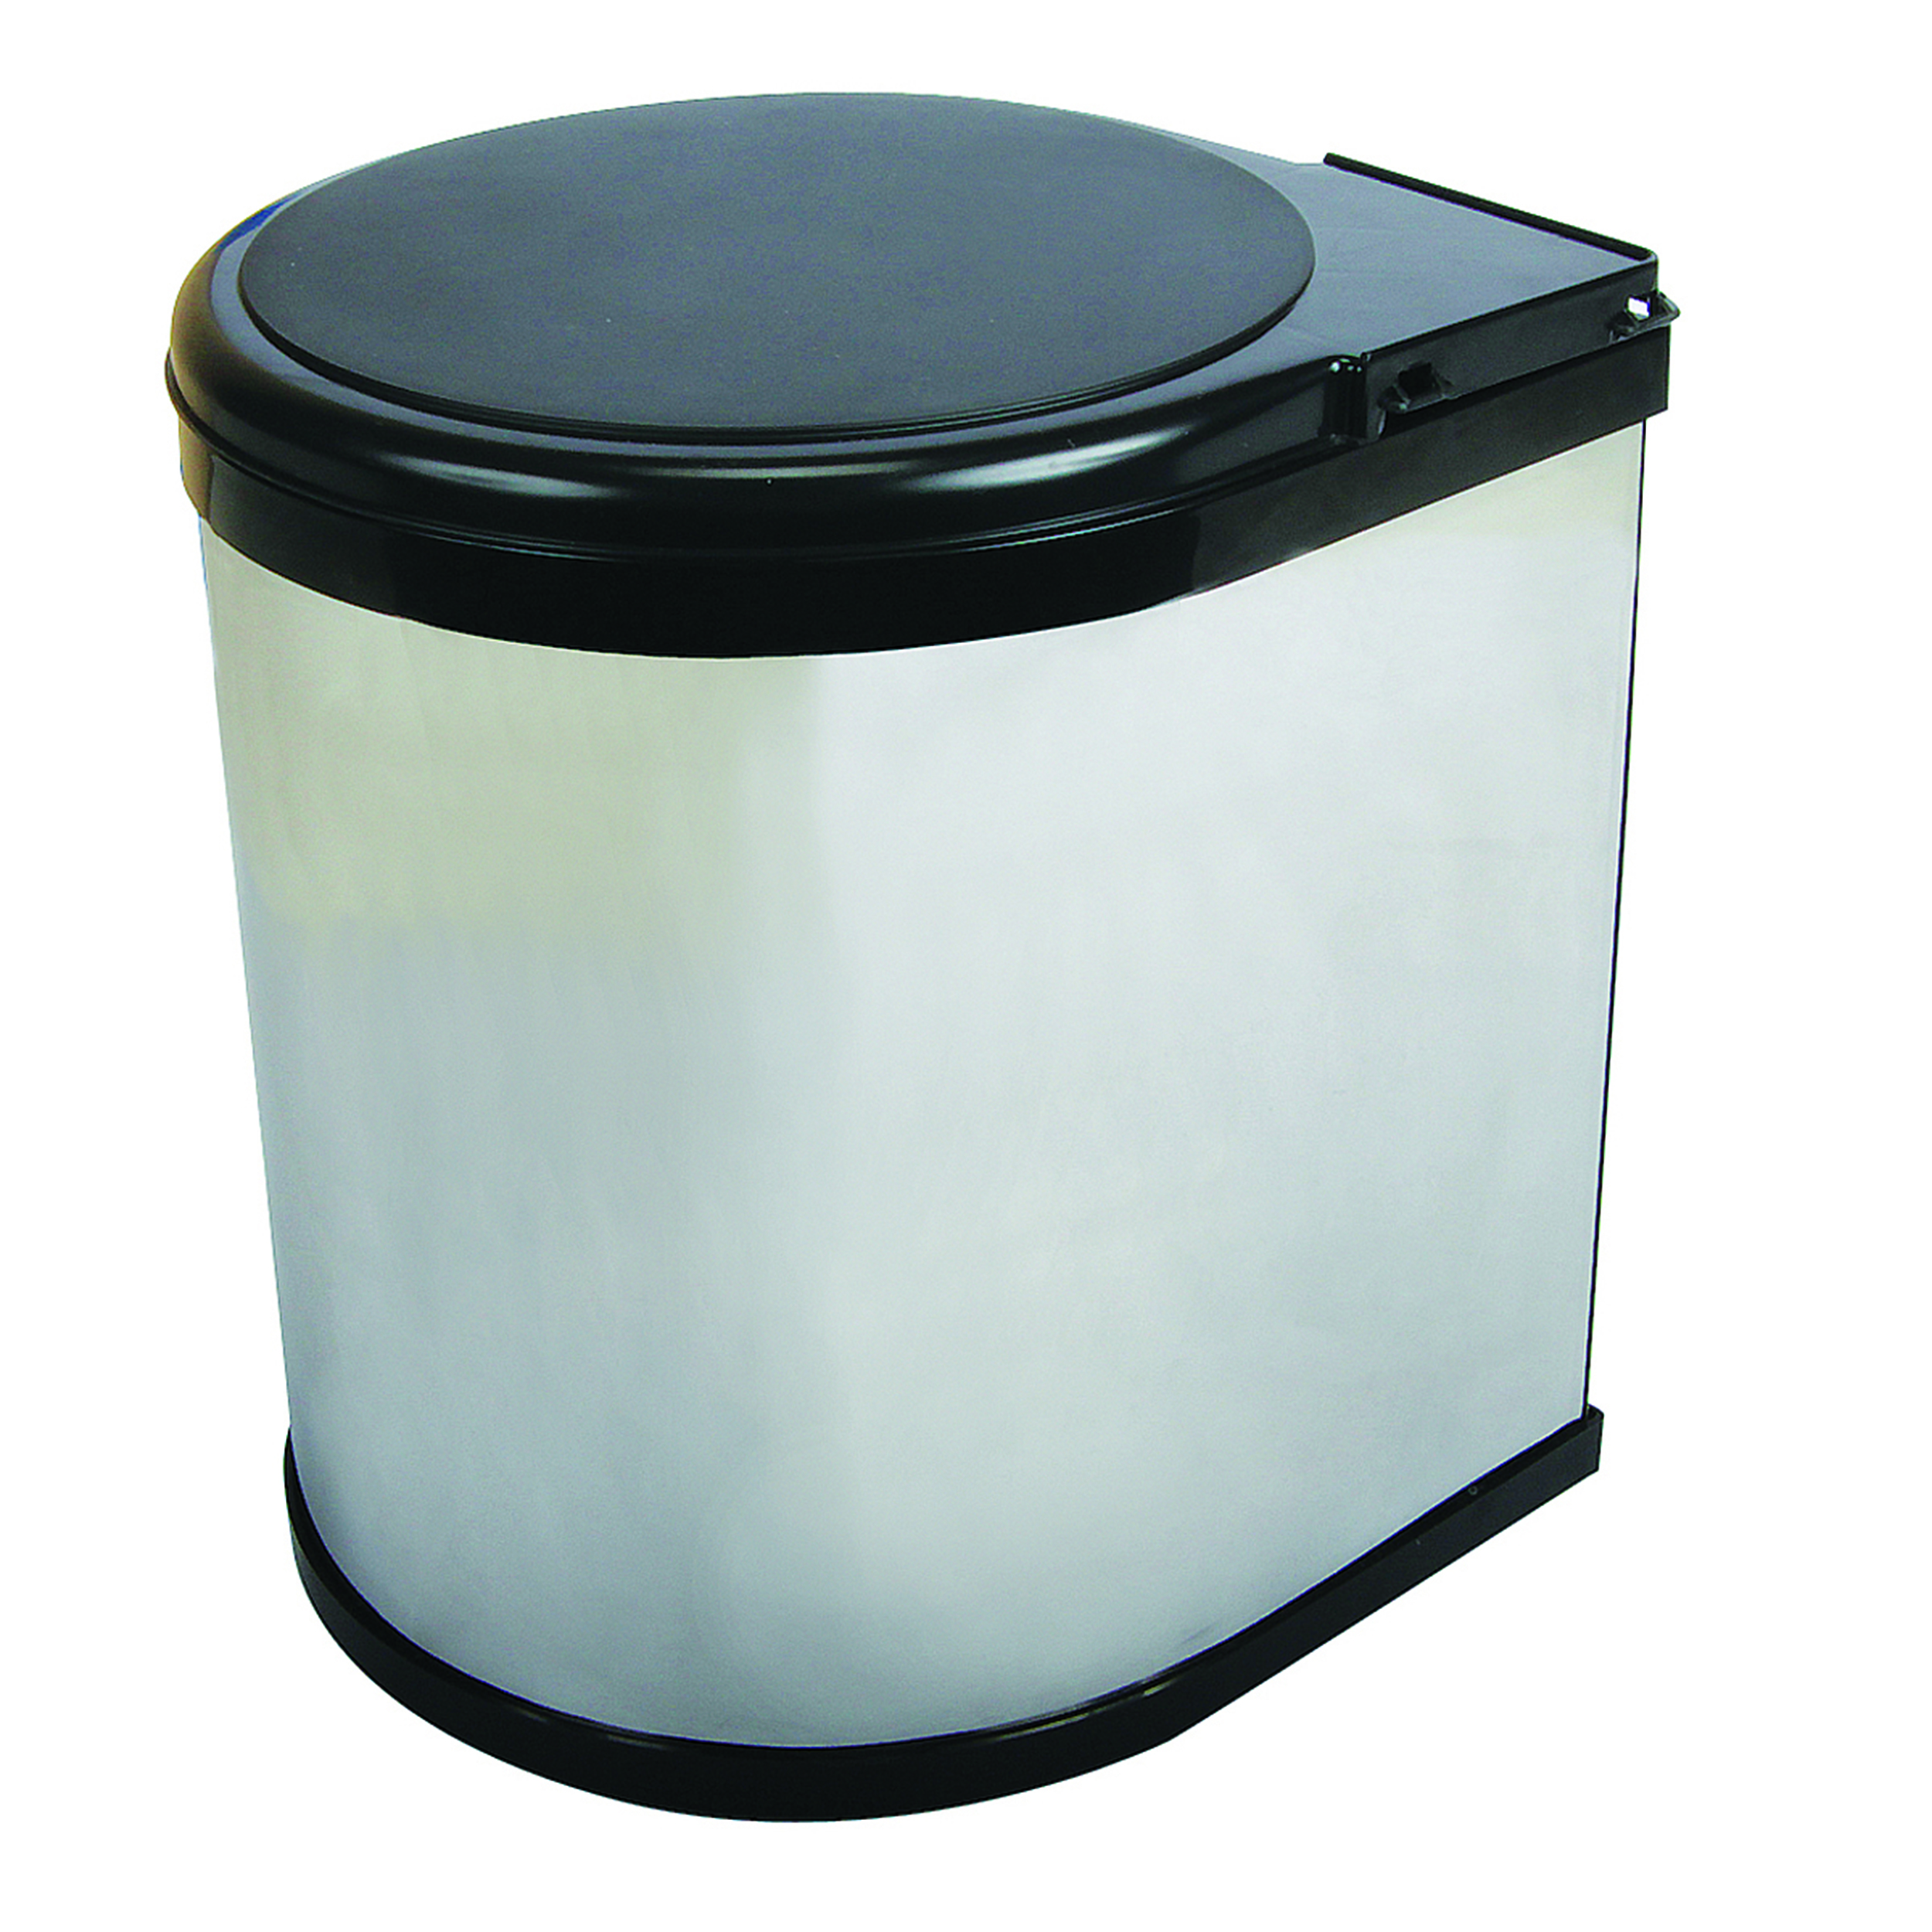 Real Solutions Single 12qt Pivot-out Waste & Recyling Unit With Lid, Chrome